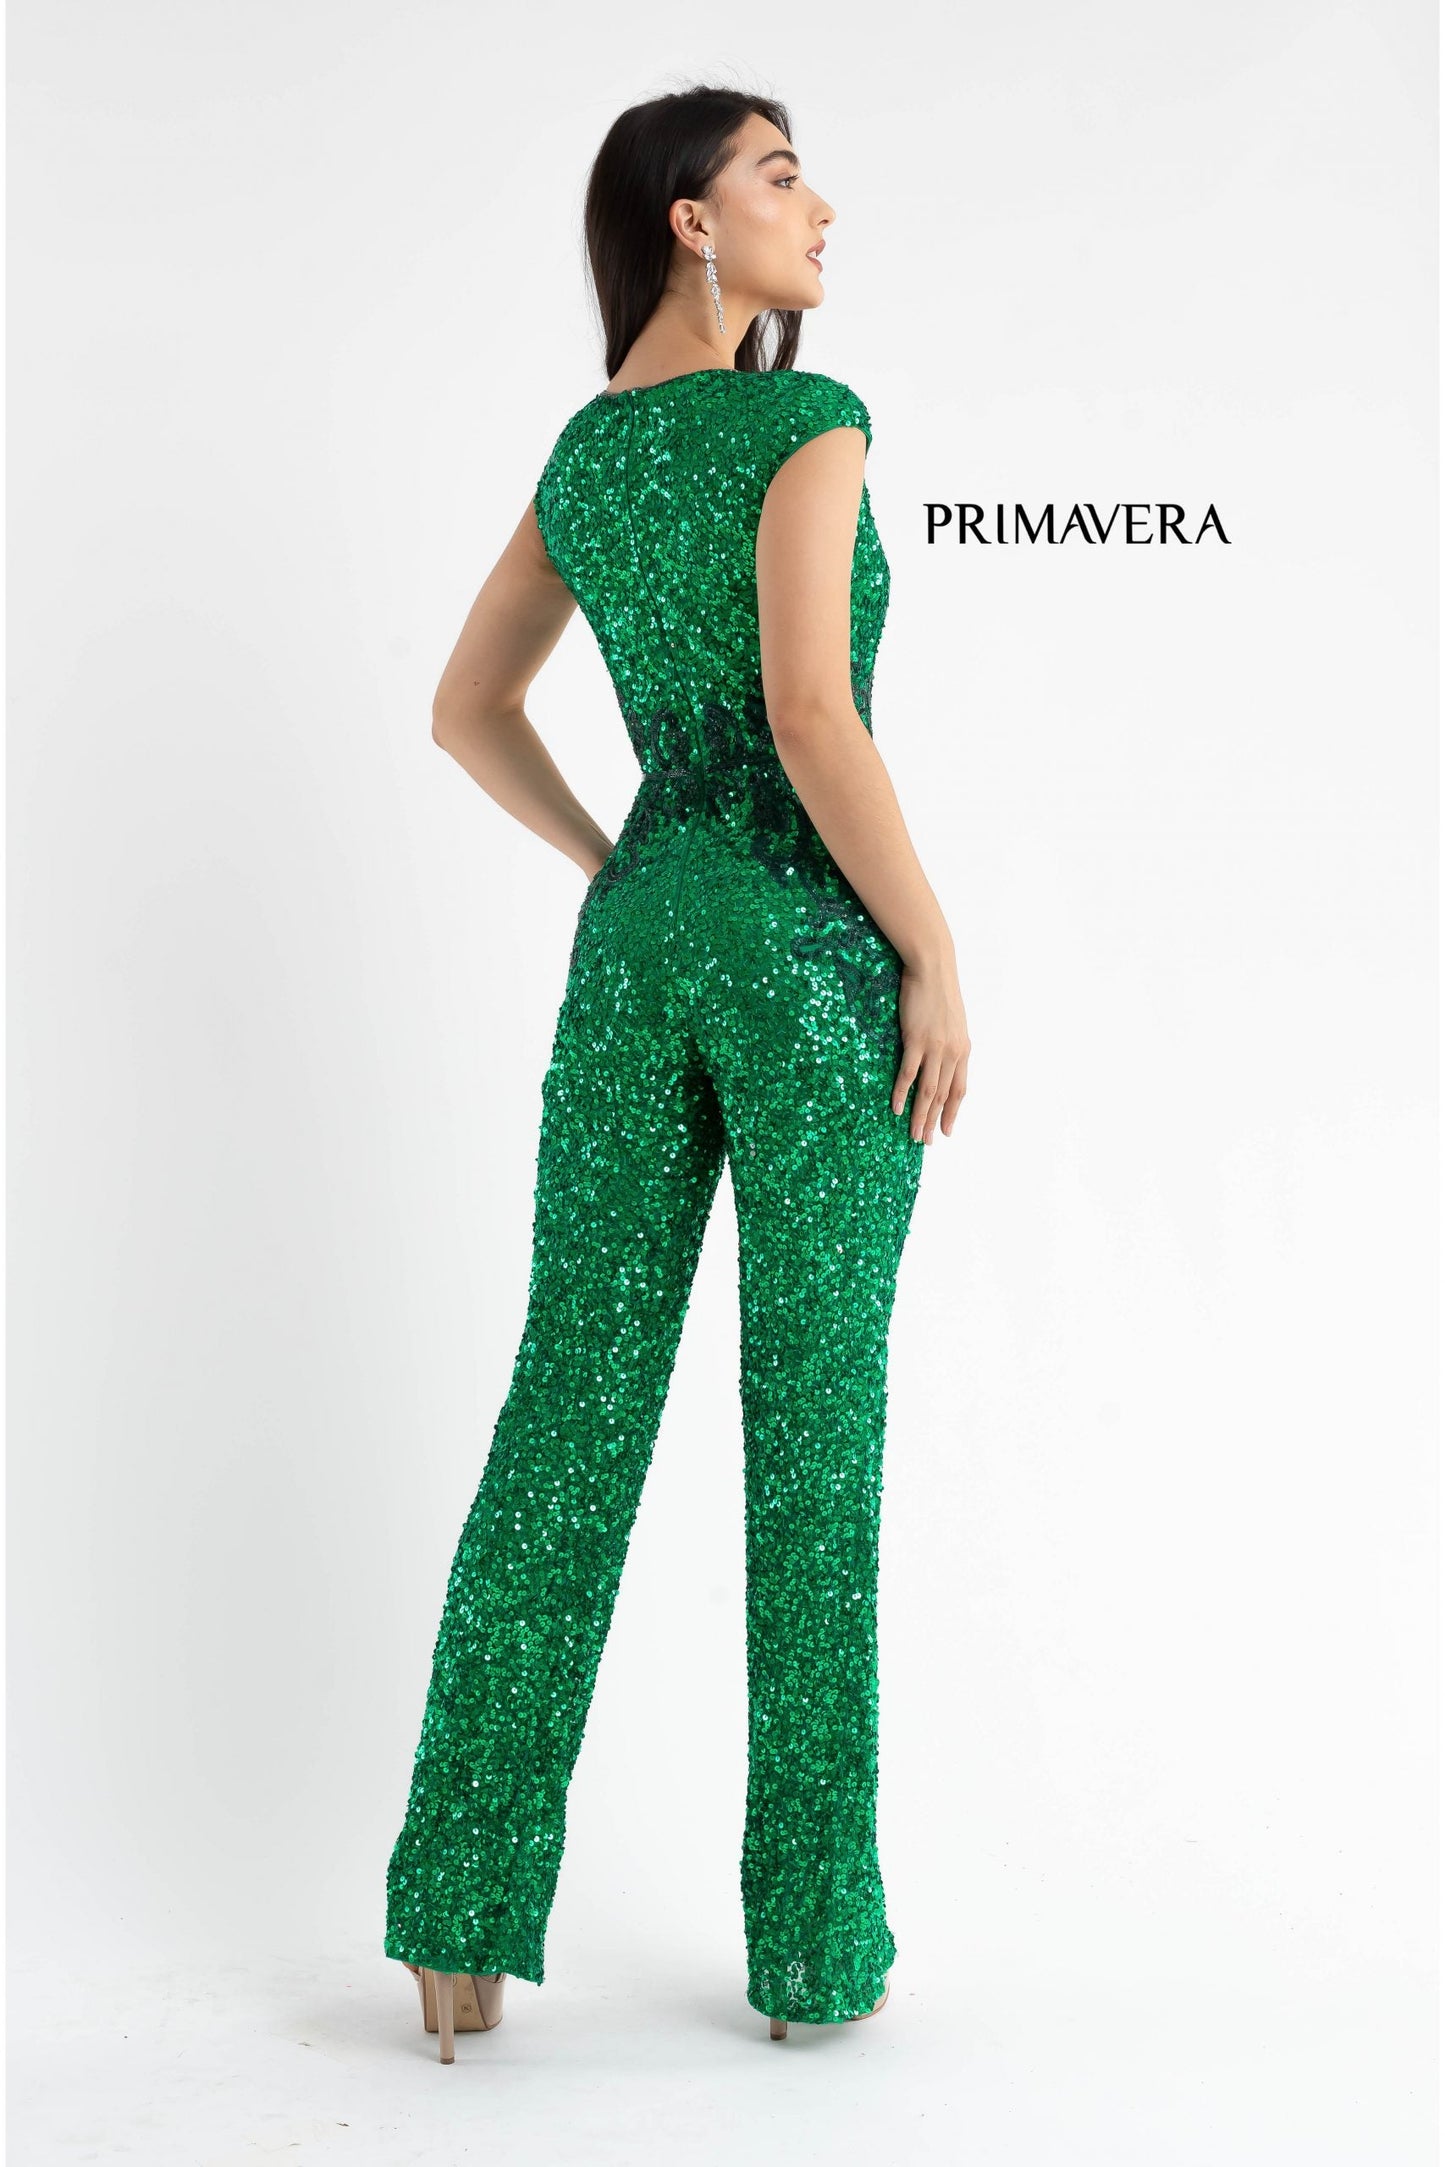 Primavera Couture 3775 Size 2, 6 Red Sequined Jumpsuit Beaded Waist and Hips Cap Sleeves